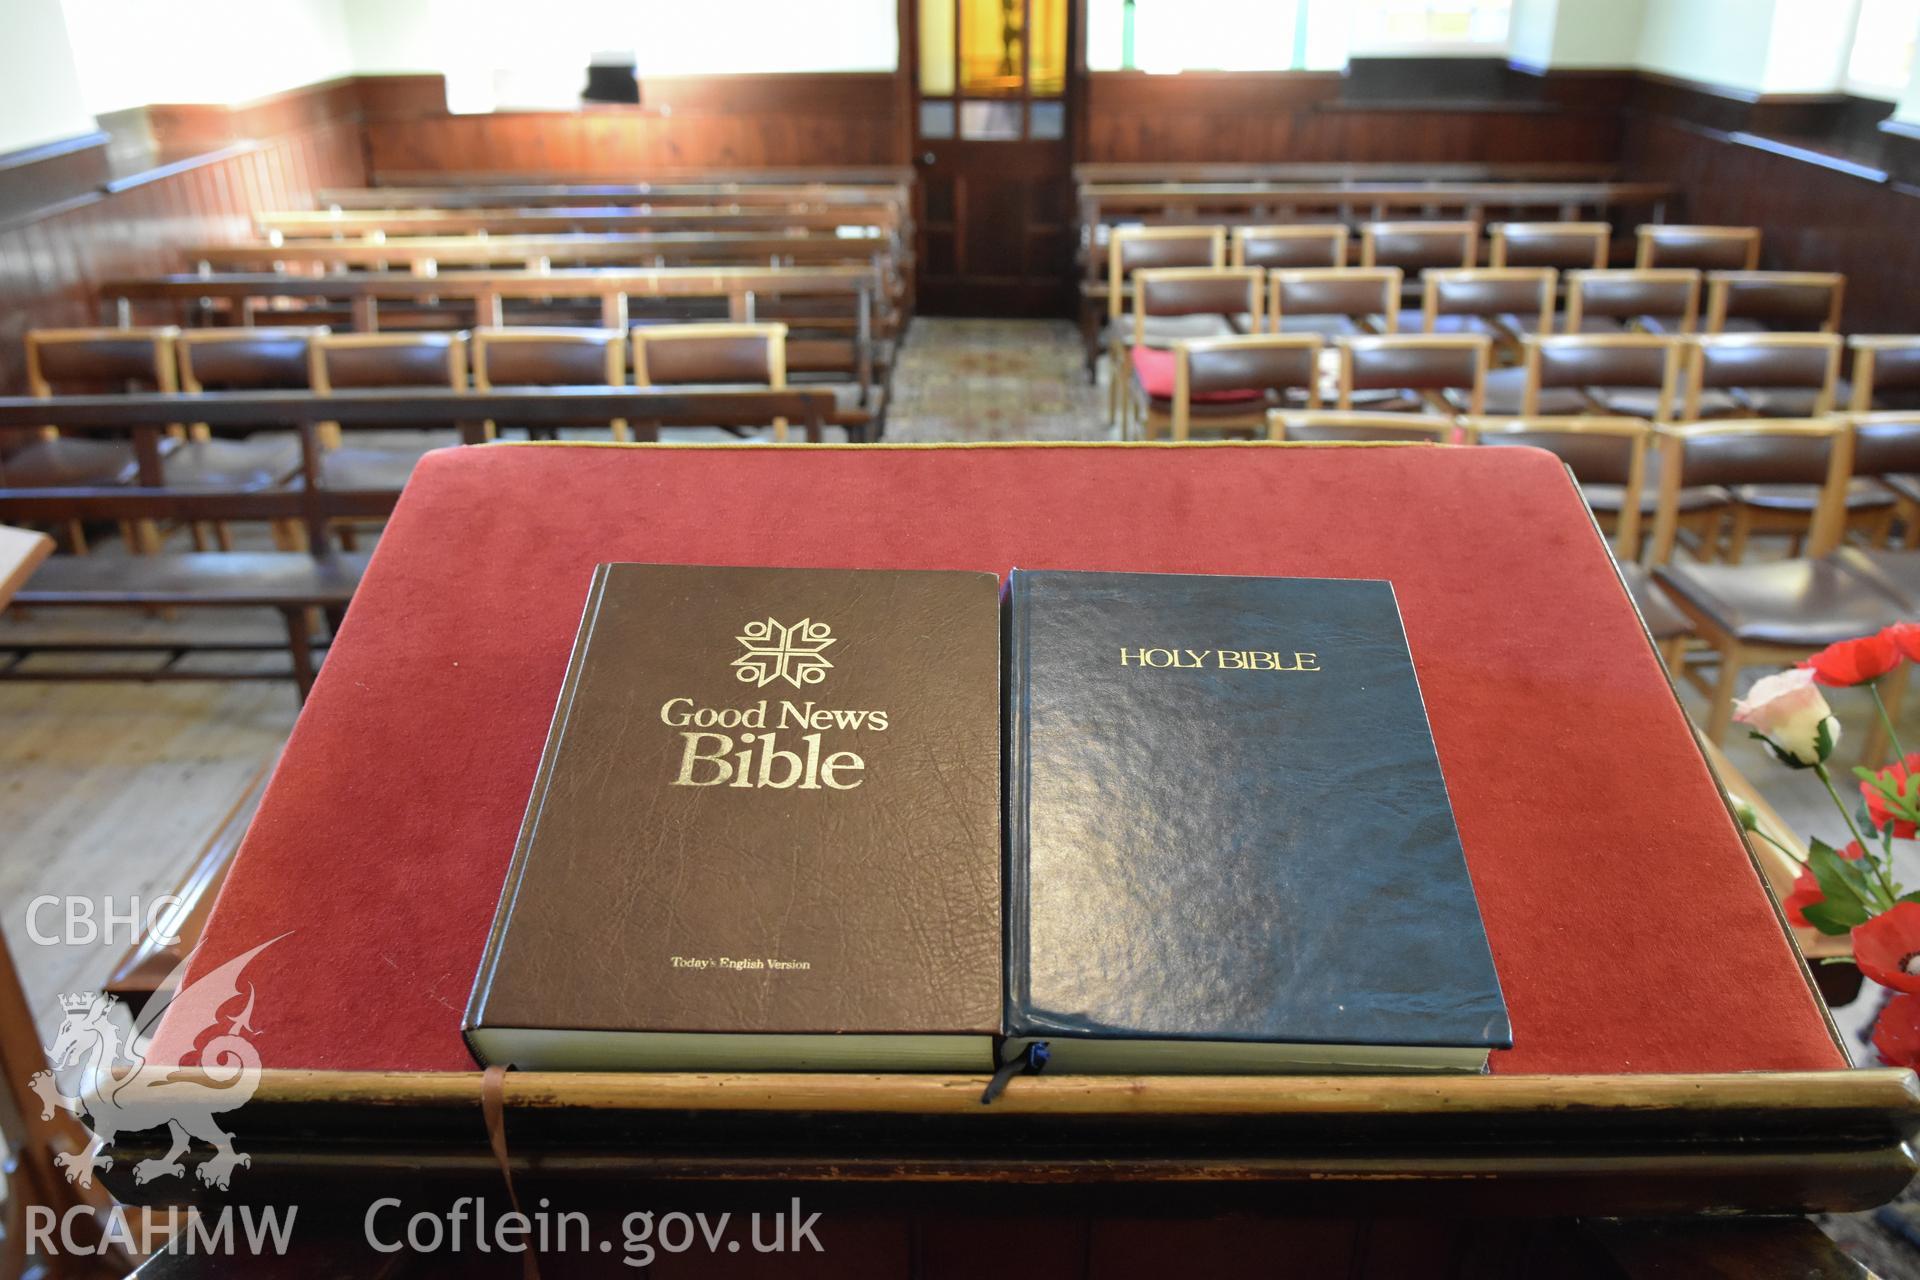 View of two bibles on the wooden pulpit at Hyssington Primitive Methodist Chapel, Hyssington, Churchstoke, with seating for the congregation beyond. Photographic survey conducted by Sue Fielding on 7th December 2018.